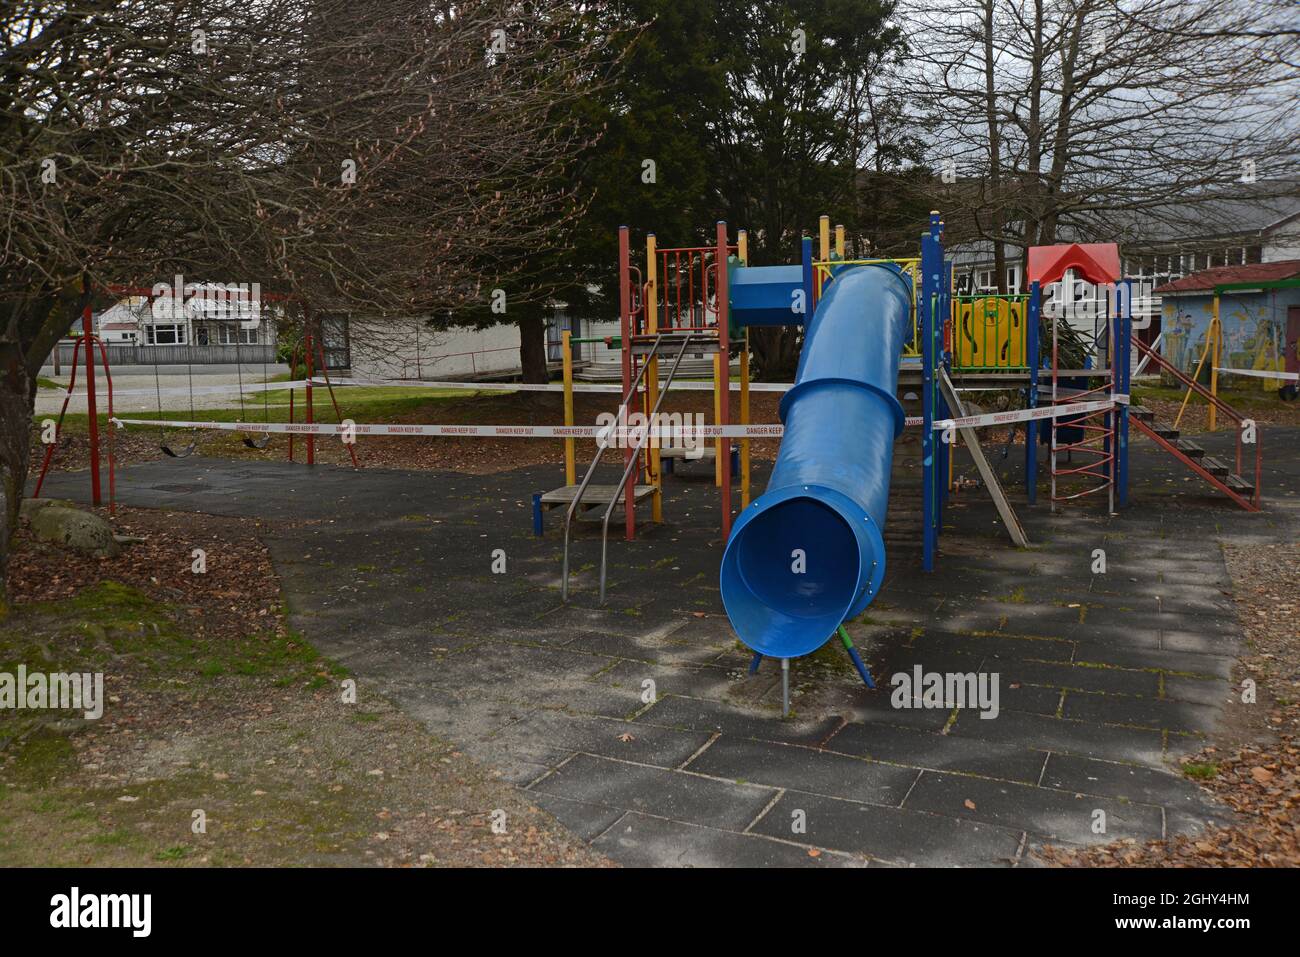 REEFTON, NEW ZEALAND, SEPTEMBER 6, 2021: Signage and barriers warn children away from a public playground during the Covid 19 lockdown in New Zealand, September 6,  2021 Stock Photo